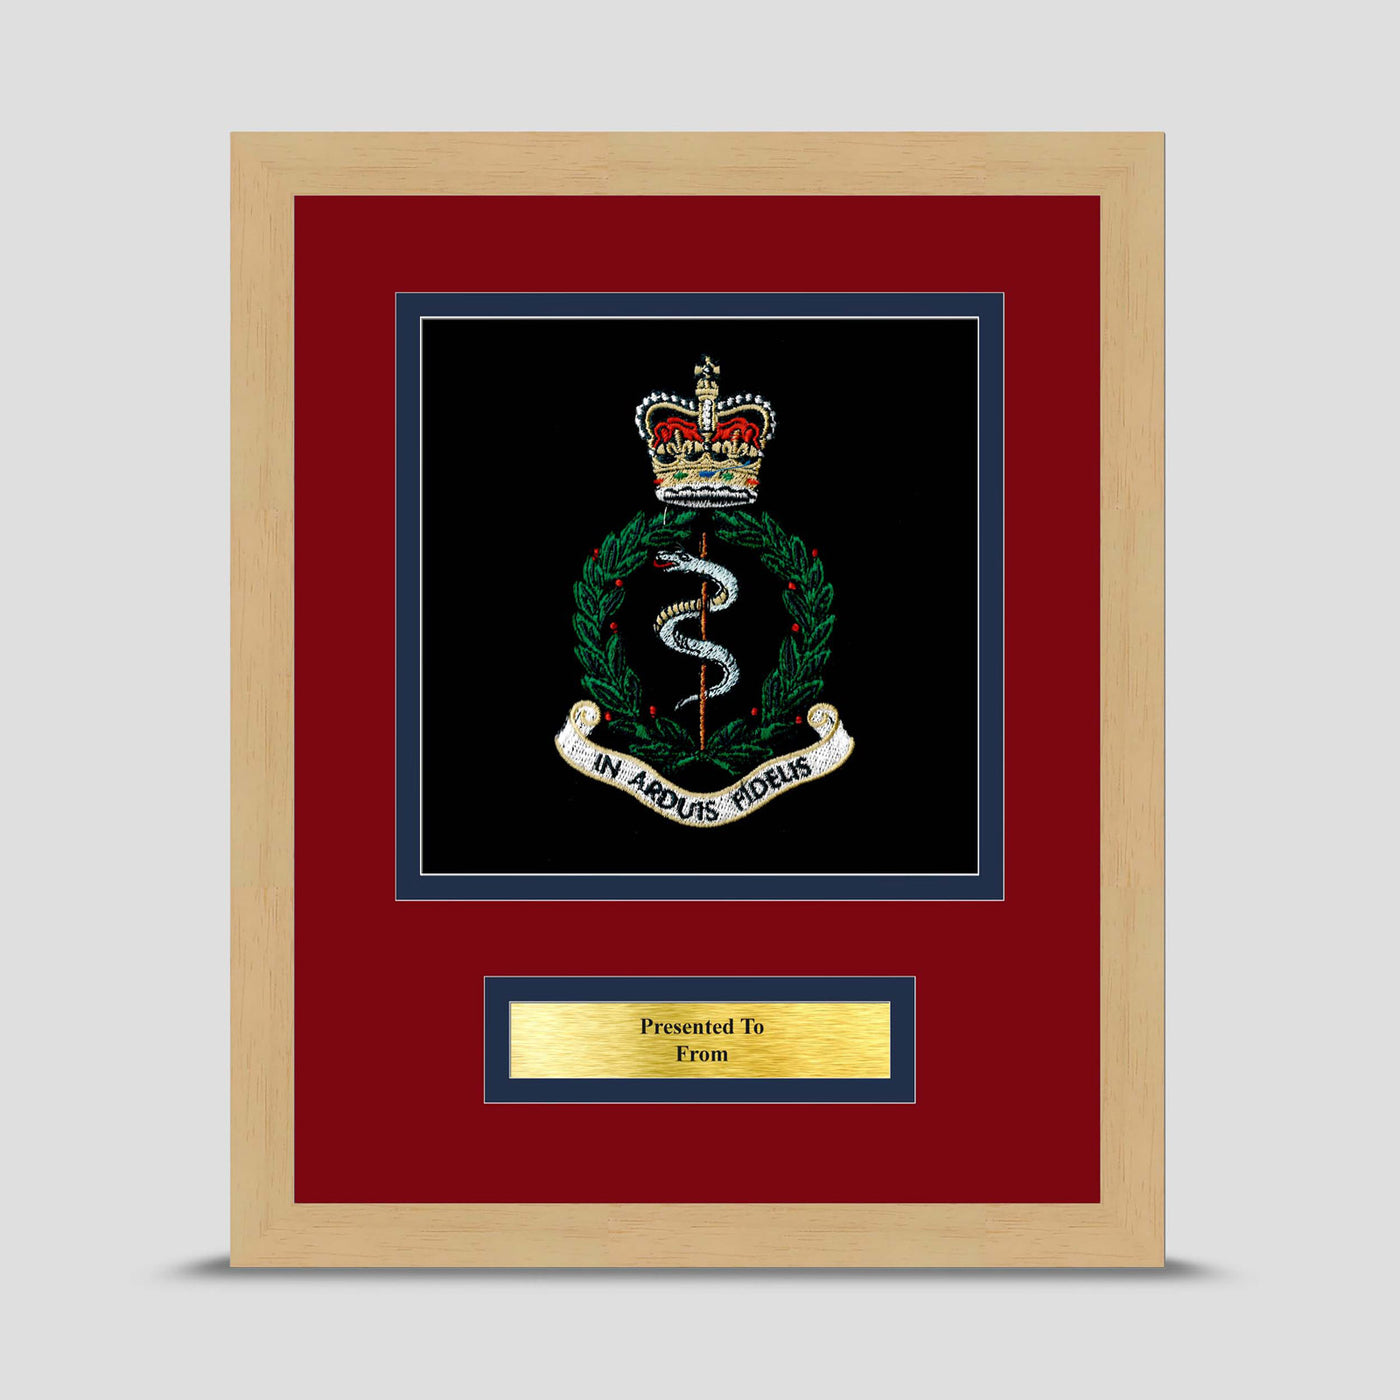 The Royal Army Medical Corps Framed Military Embroidery Presentation